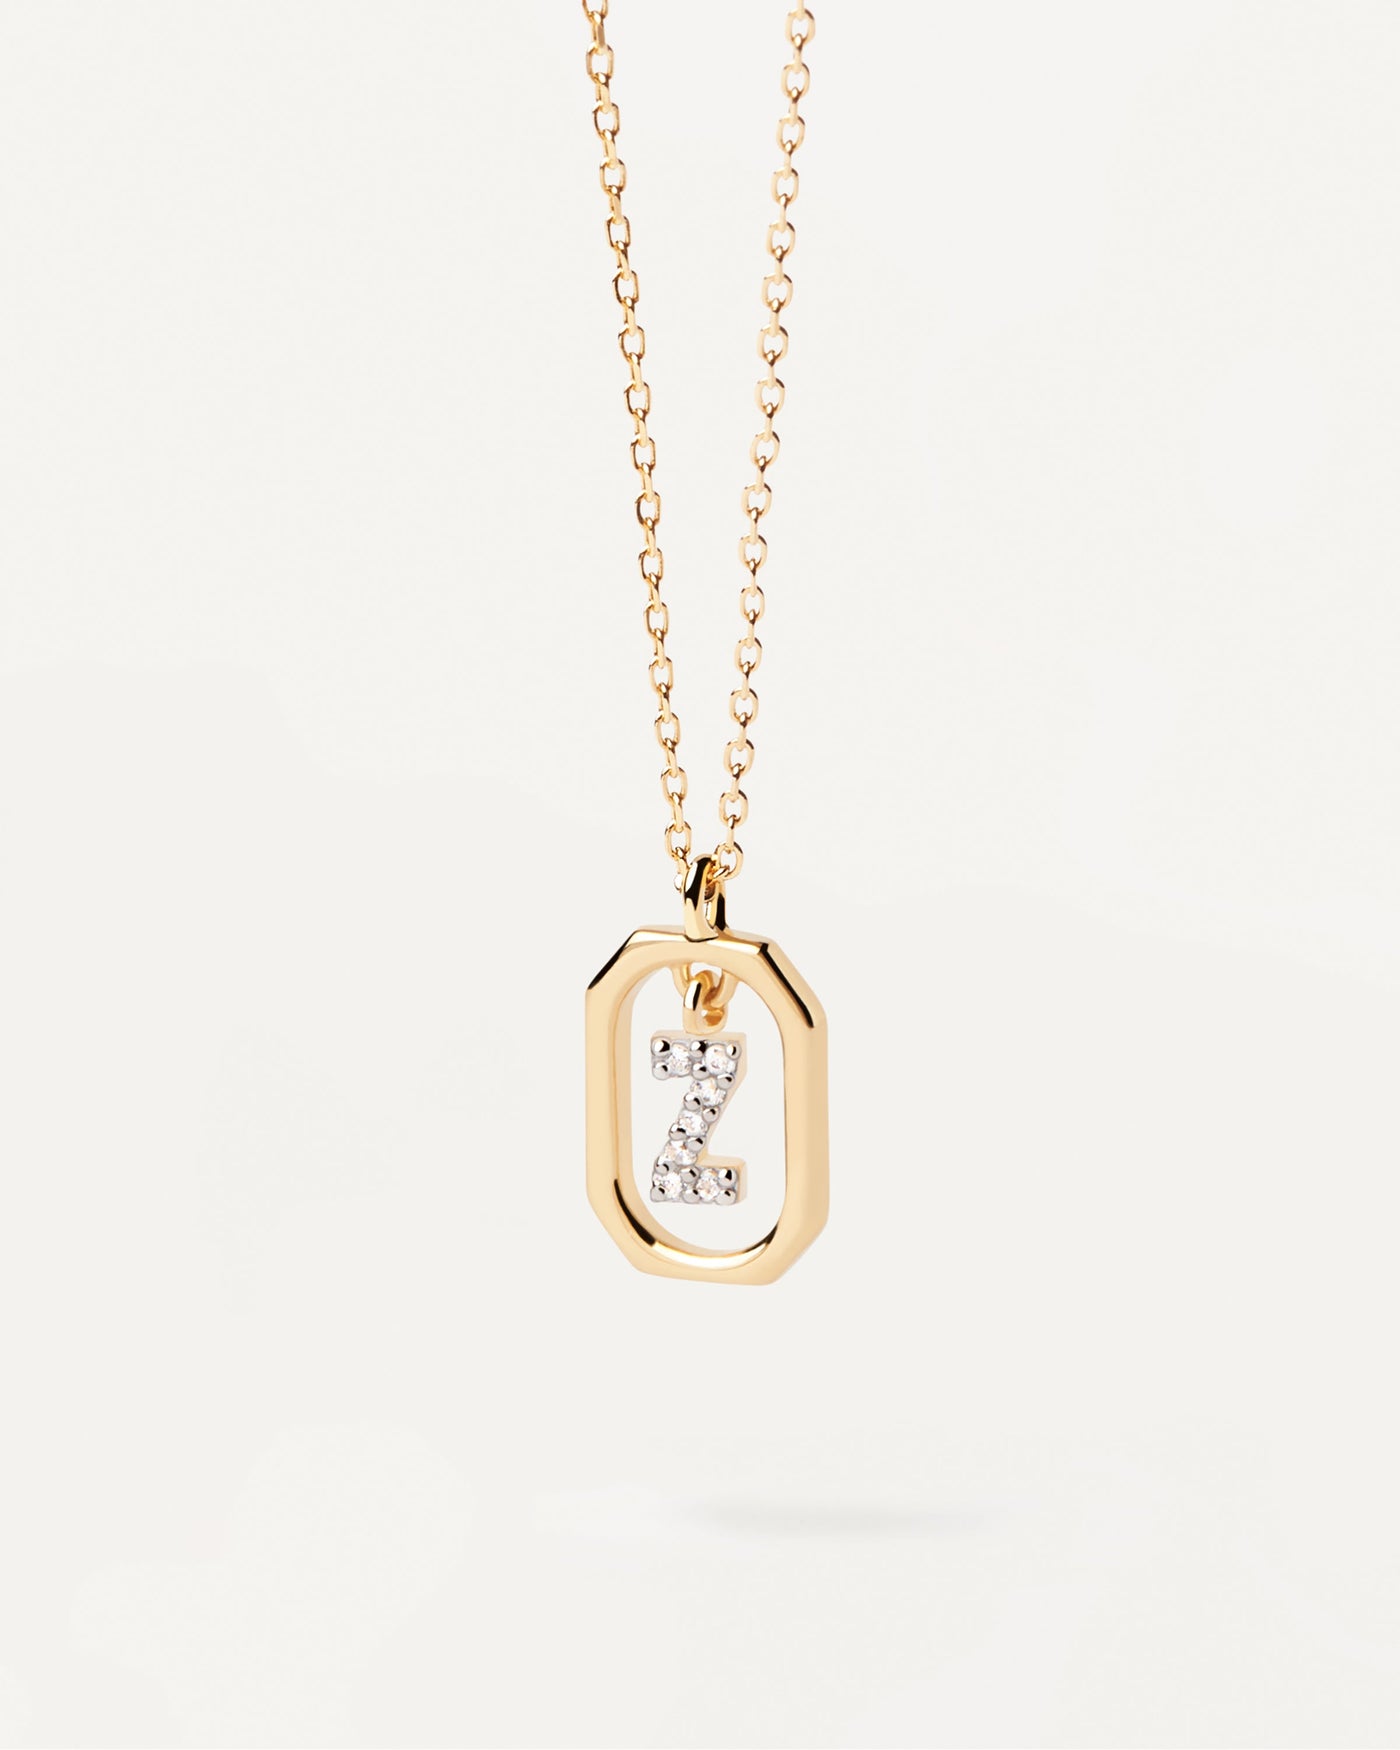 2023 Selection | Mini Letter Z Necklace. Small initial Z necklace in zirconia inside gold-plated silver octagonal pendant. Get the latest arrival from PDPAOLA. Place your order safely and get this Best Seller. Free Shipping.